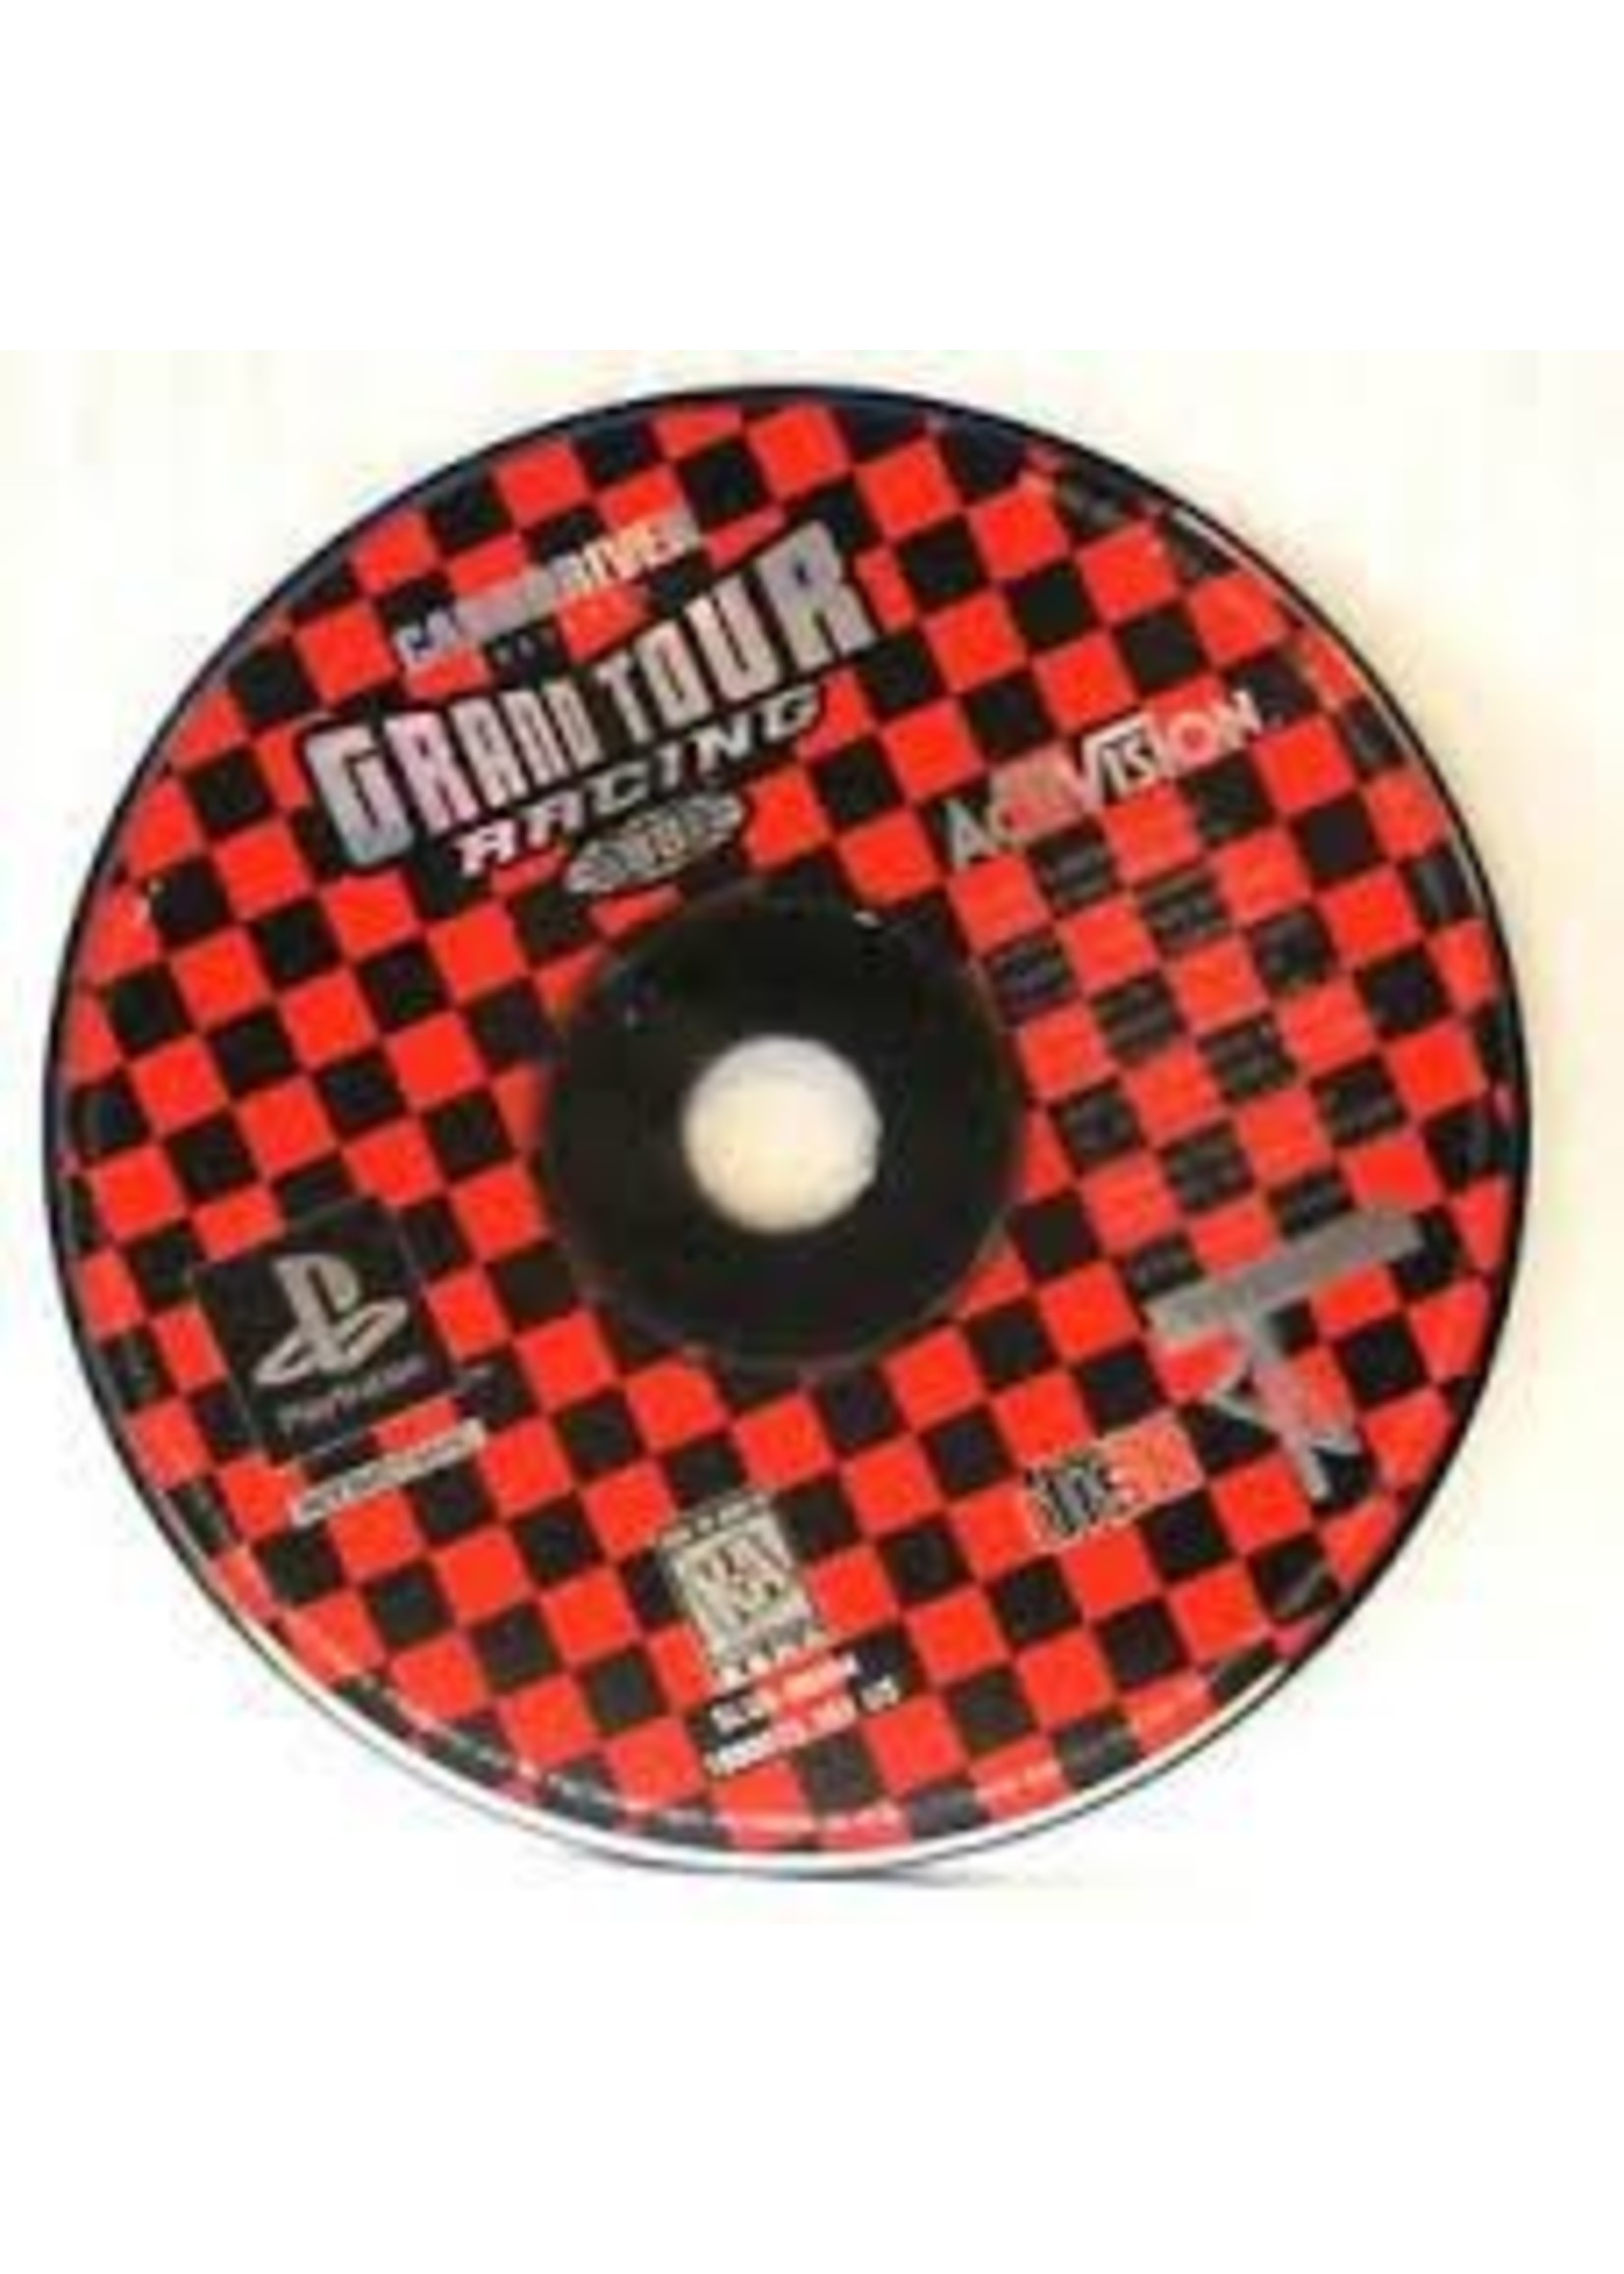 Sony Playstation 1 (PS1) Car and Driver Presents Grand Tour Racing 98 - Print